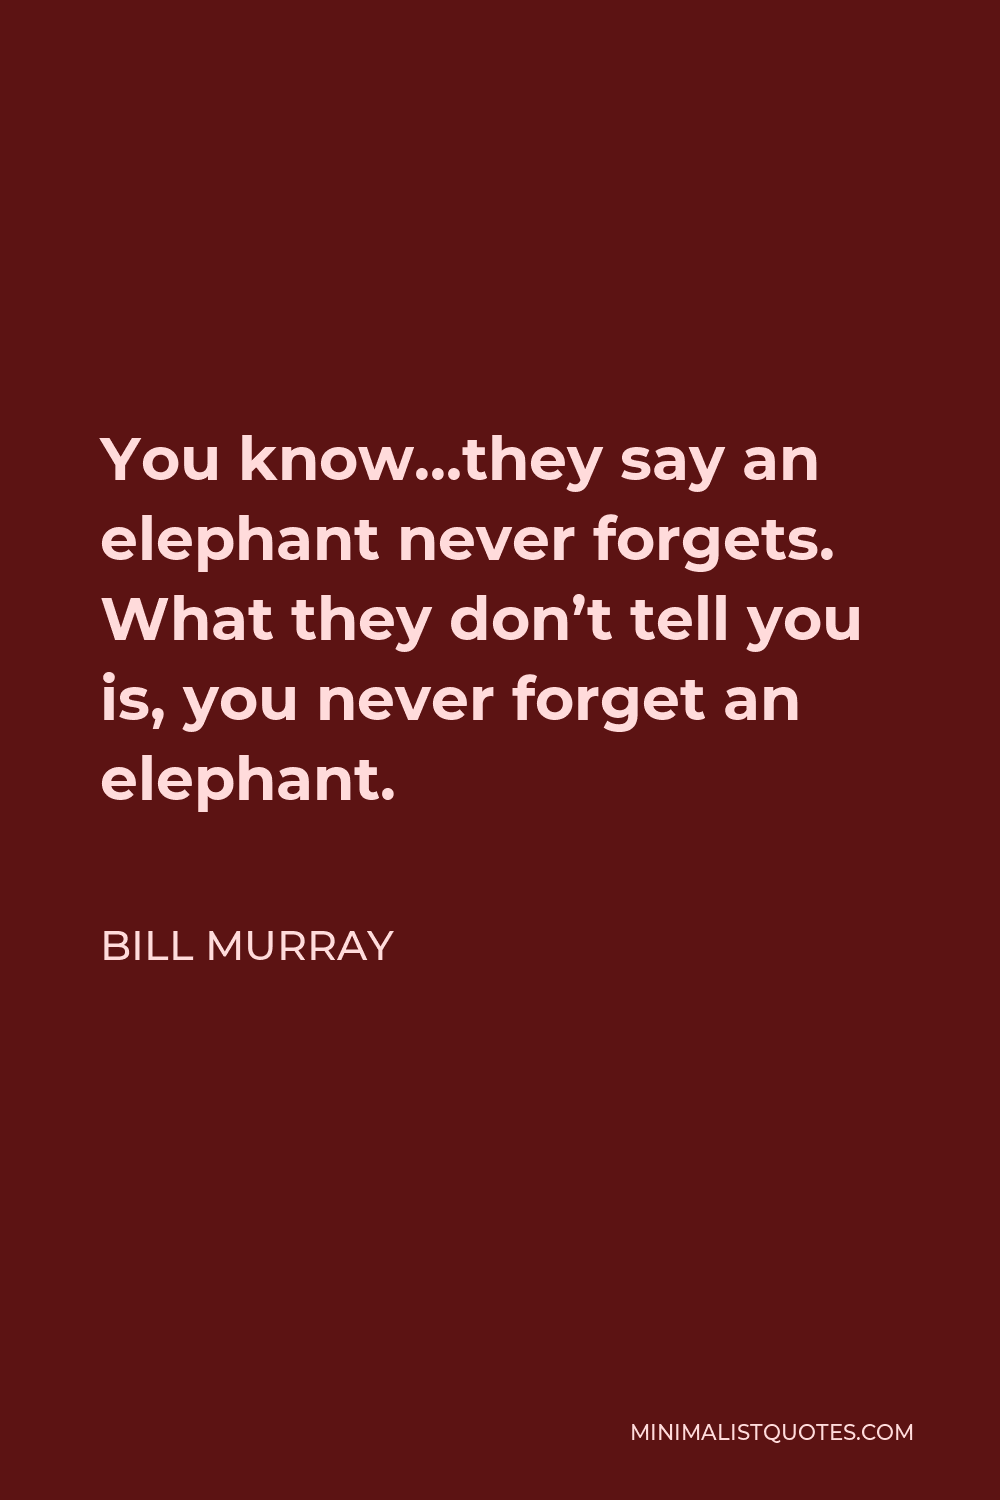 Bill Murray Quote - You know…they say an elephant never forgets. What they don’t tell you is, you never forget an elephant.